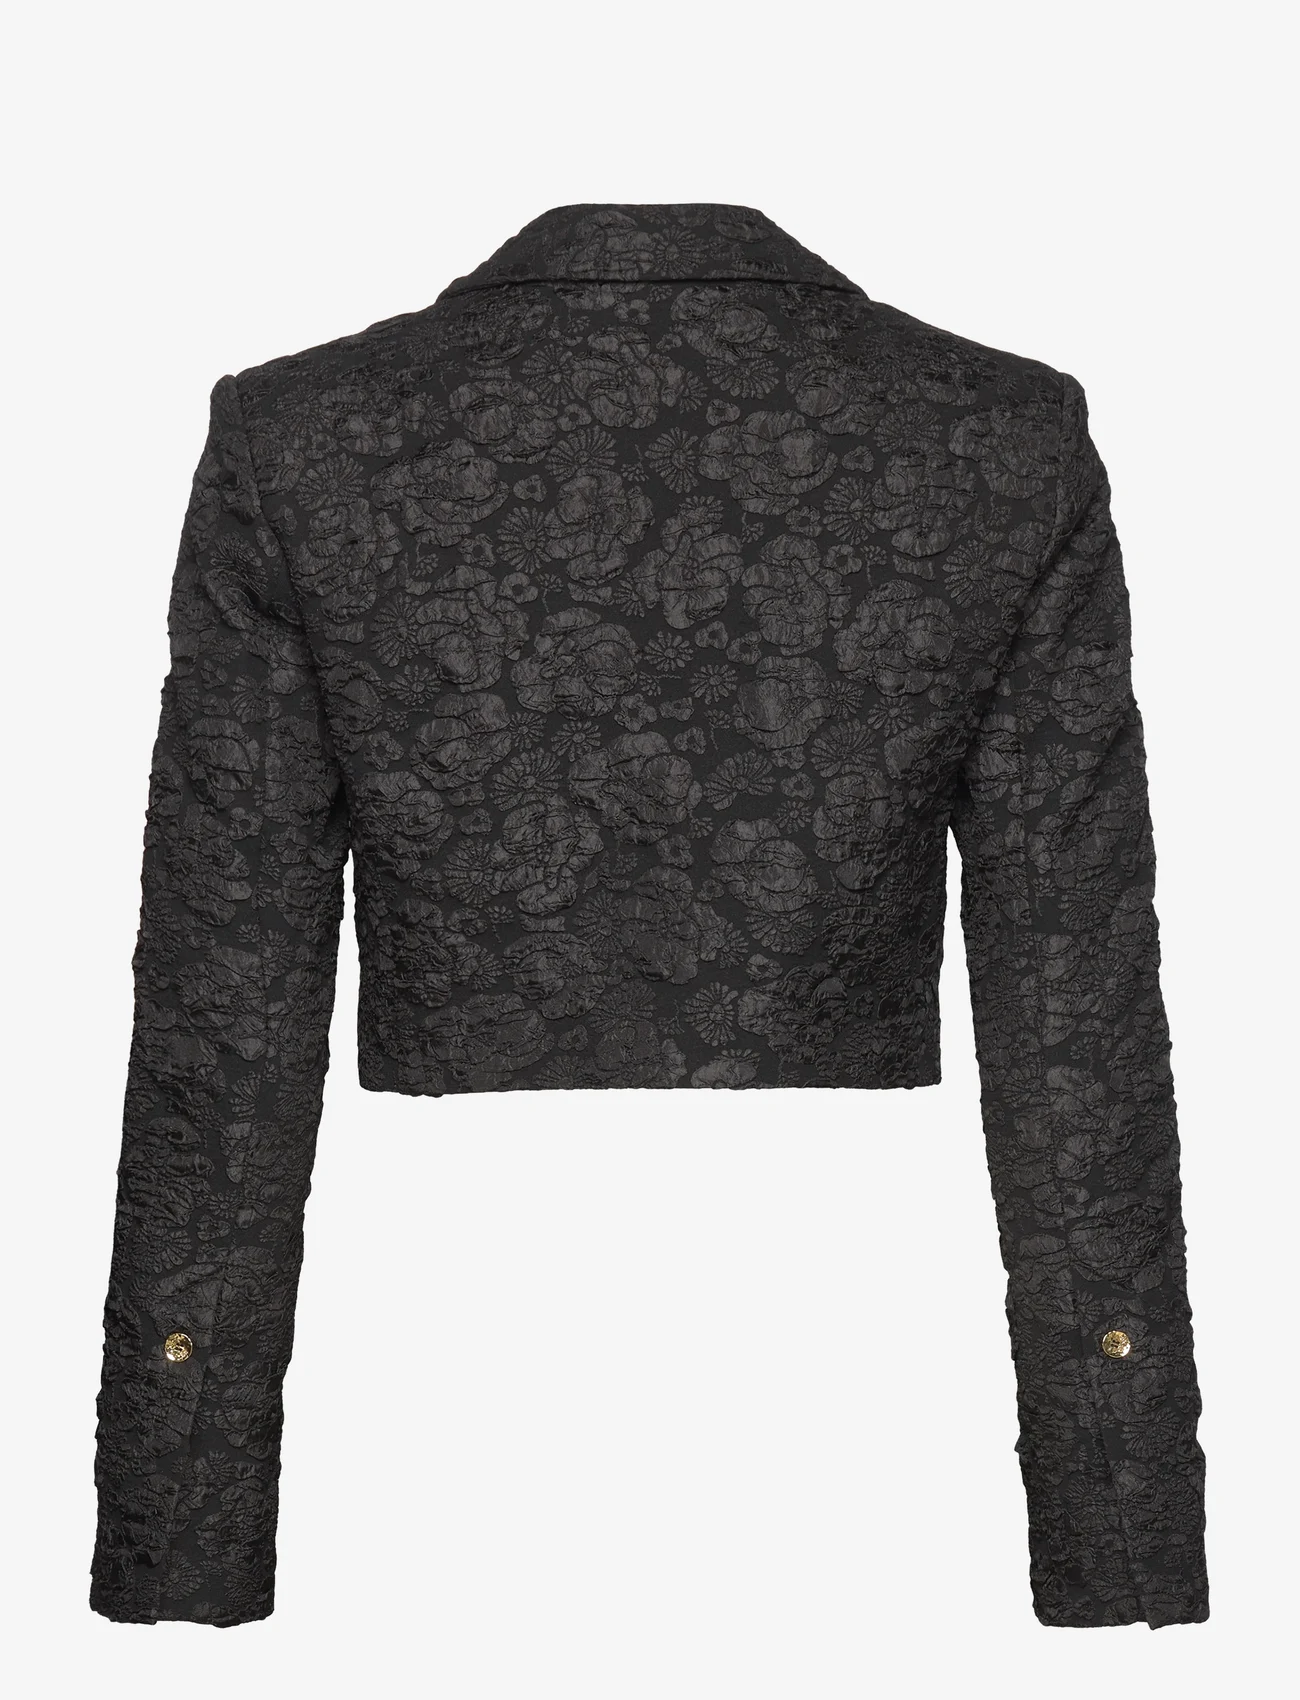 Ganni - Stretch Jacquard Cropped Blazer - party wear at outlet prices - black - 1